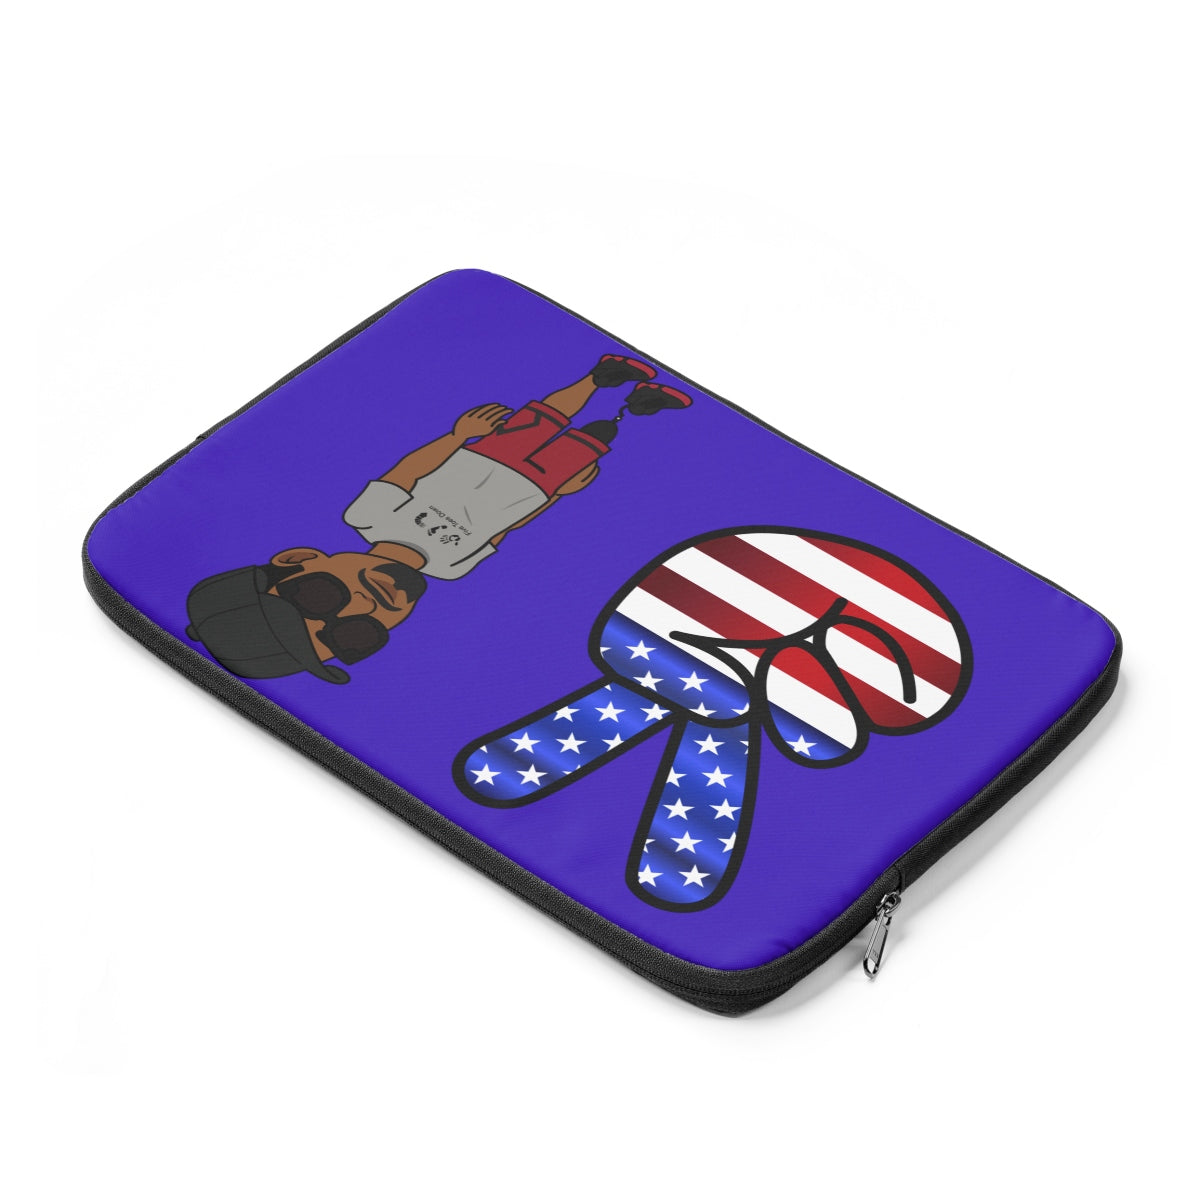 Five Toes Down Peace Laptop Sleeve